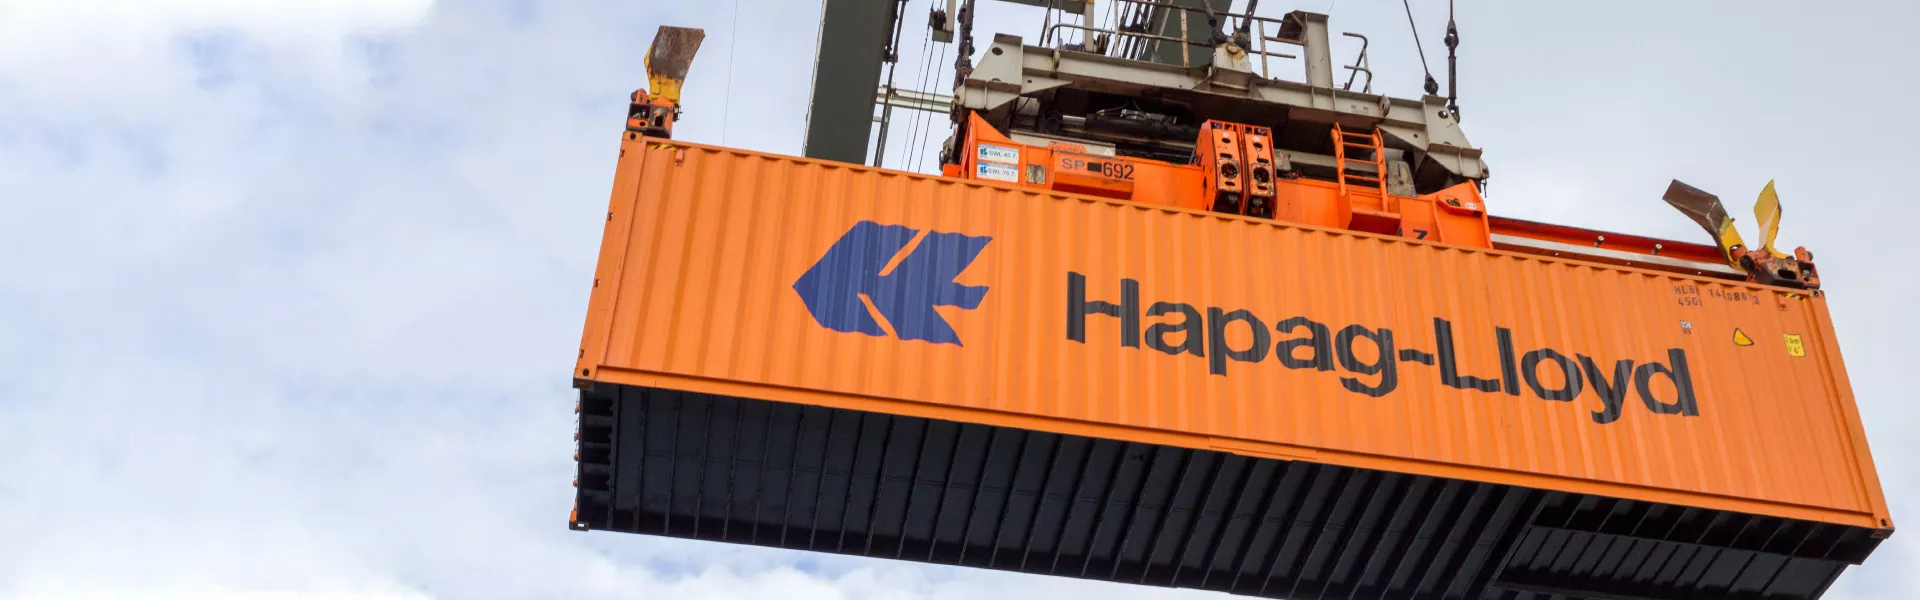 Integrated Financial e Operational Planning in Hapag-Lloyd